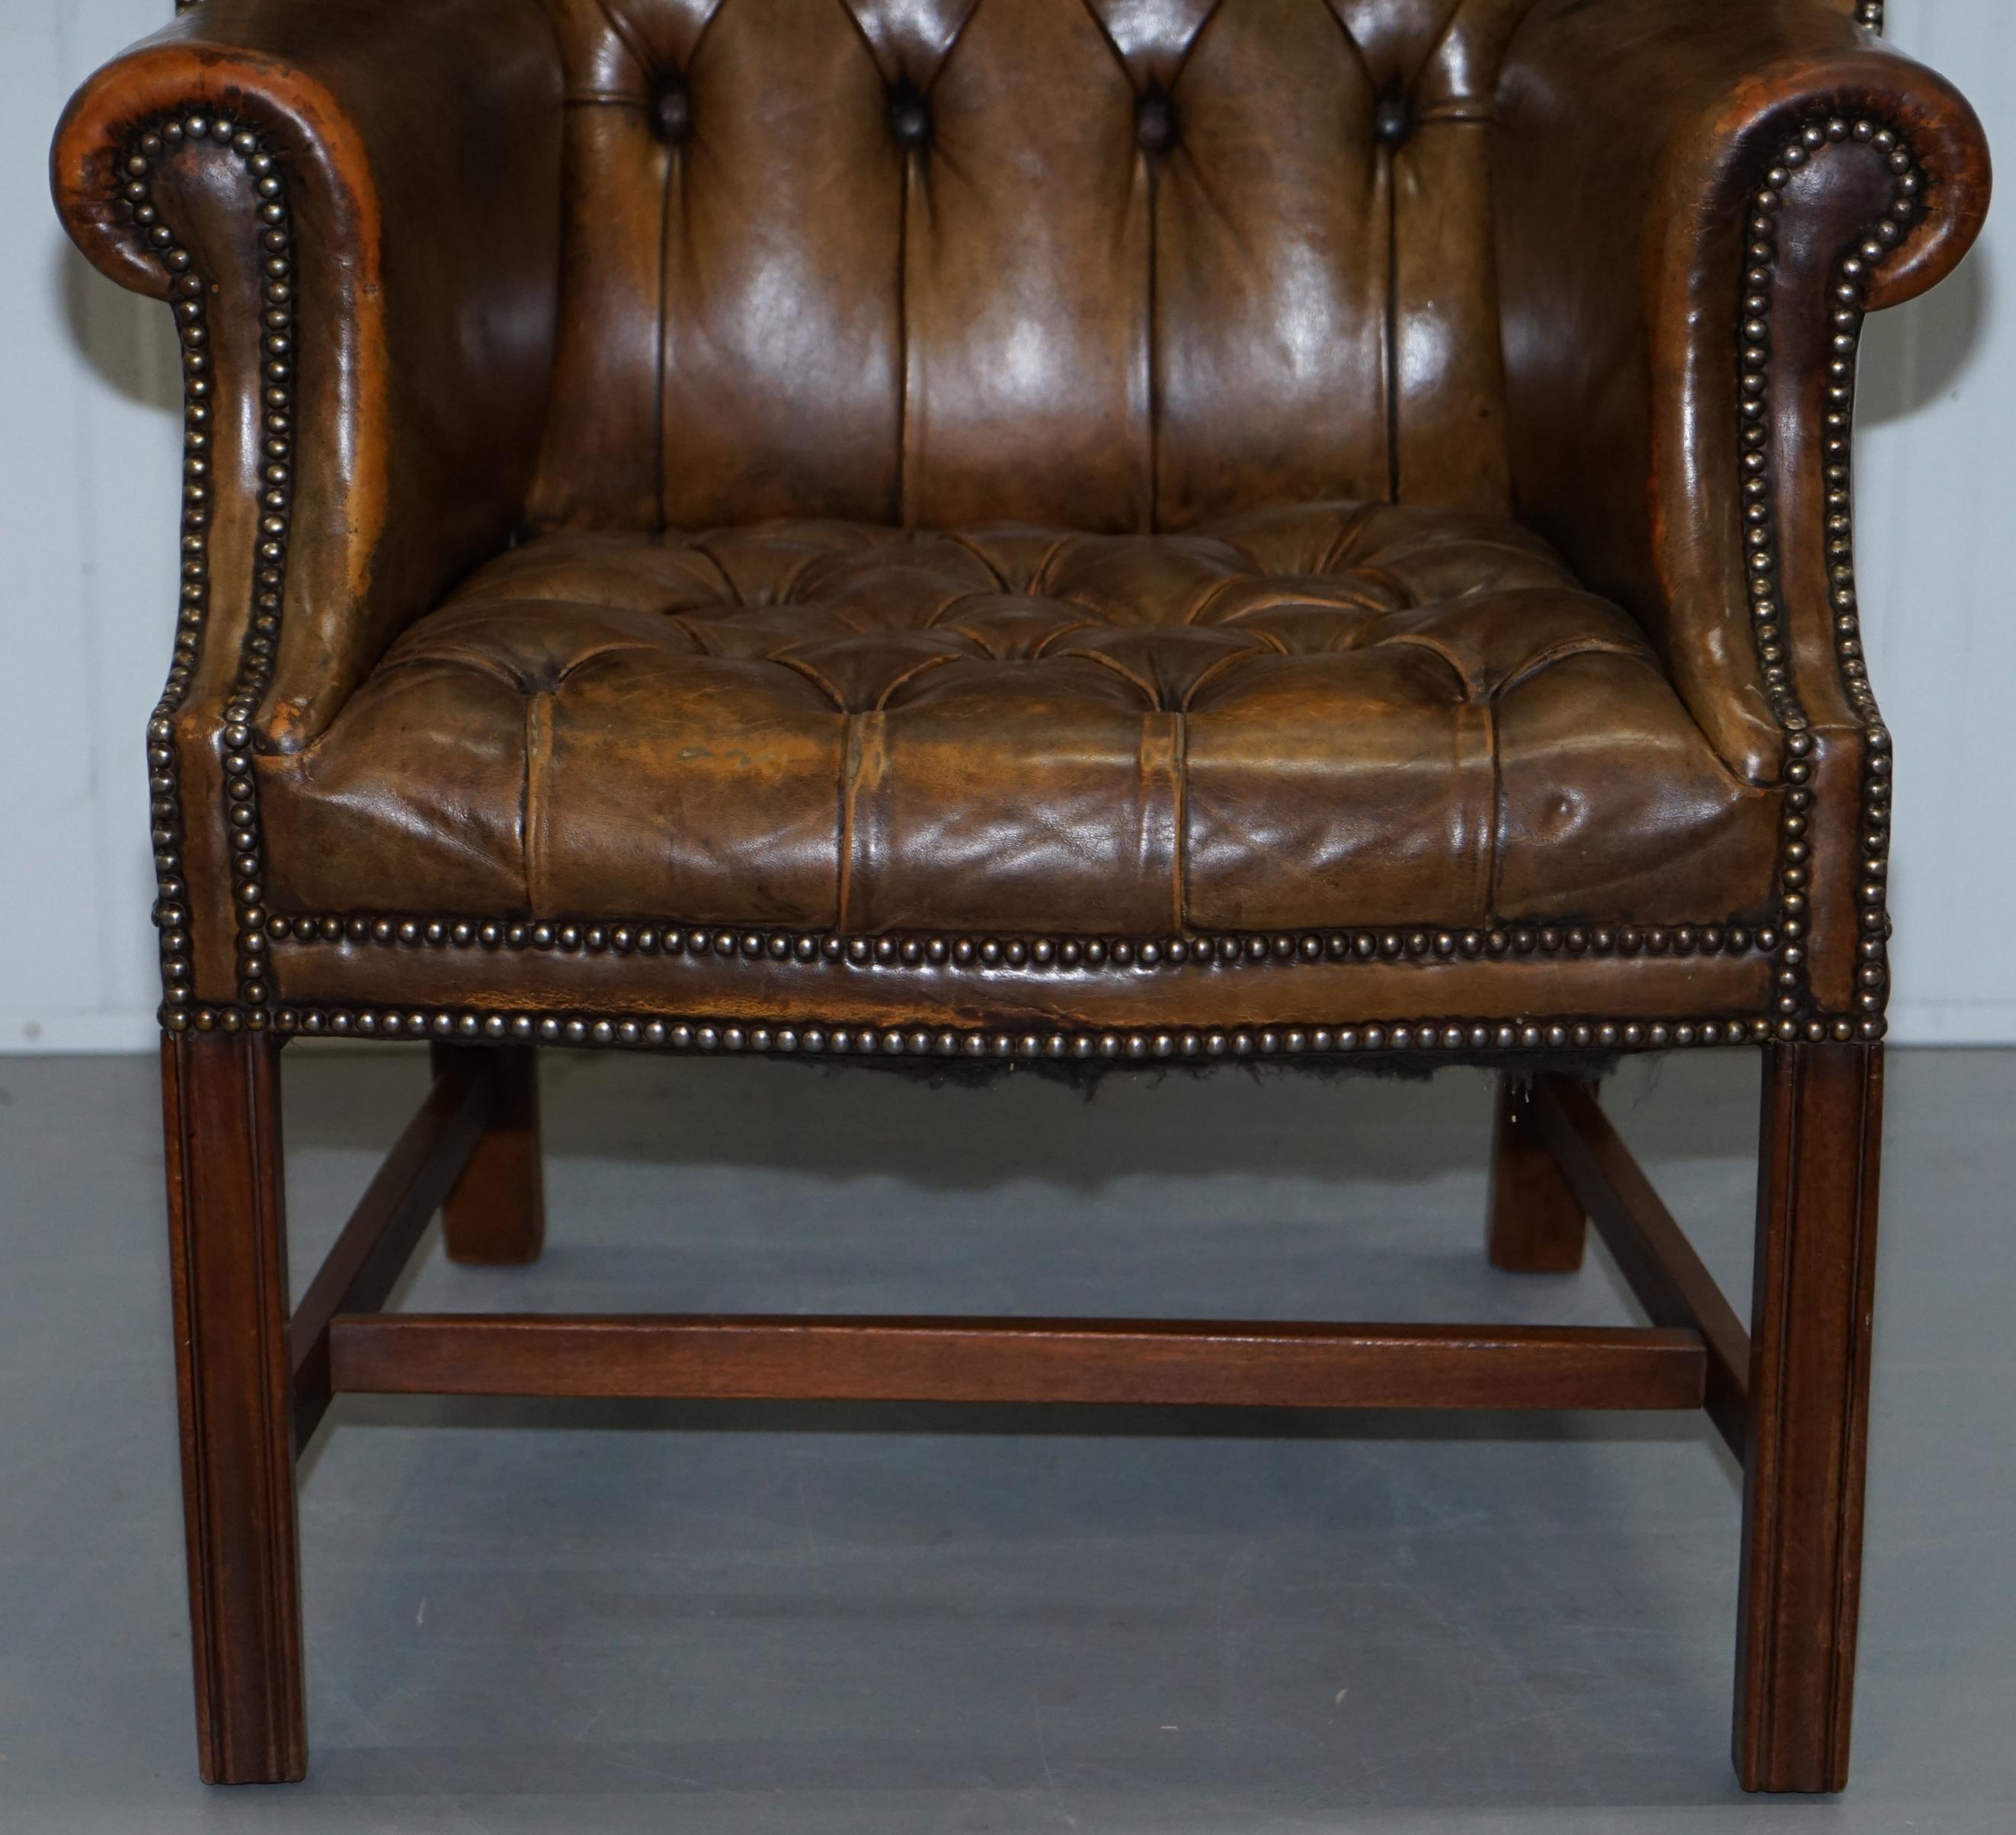 Very Rare Original 1930s Chesterfield Fully Buttoned Leather Wingback Armchair 5